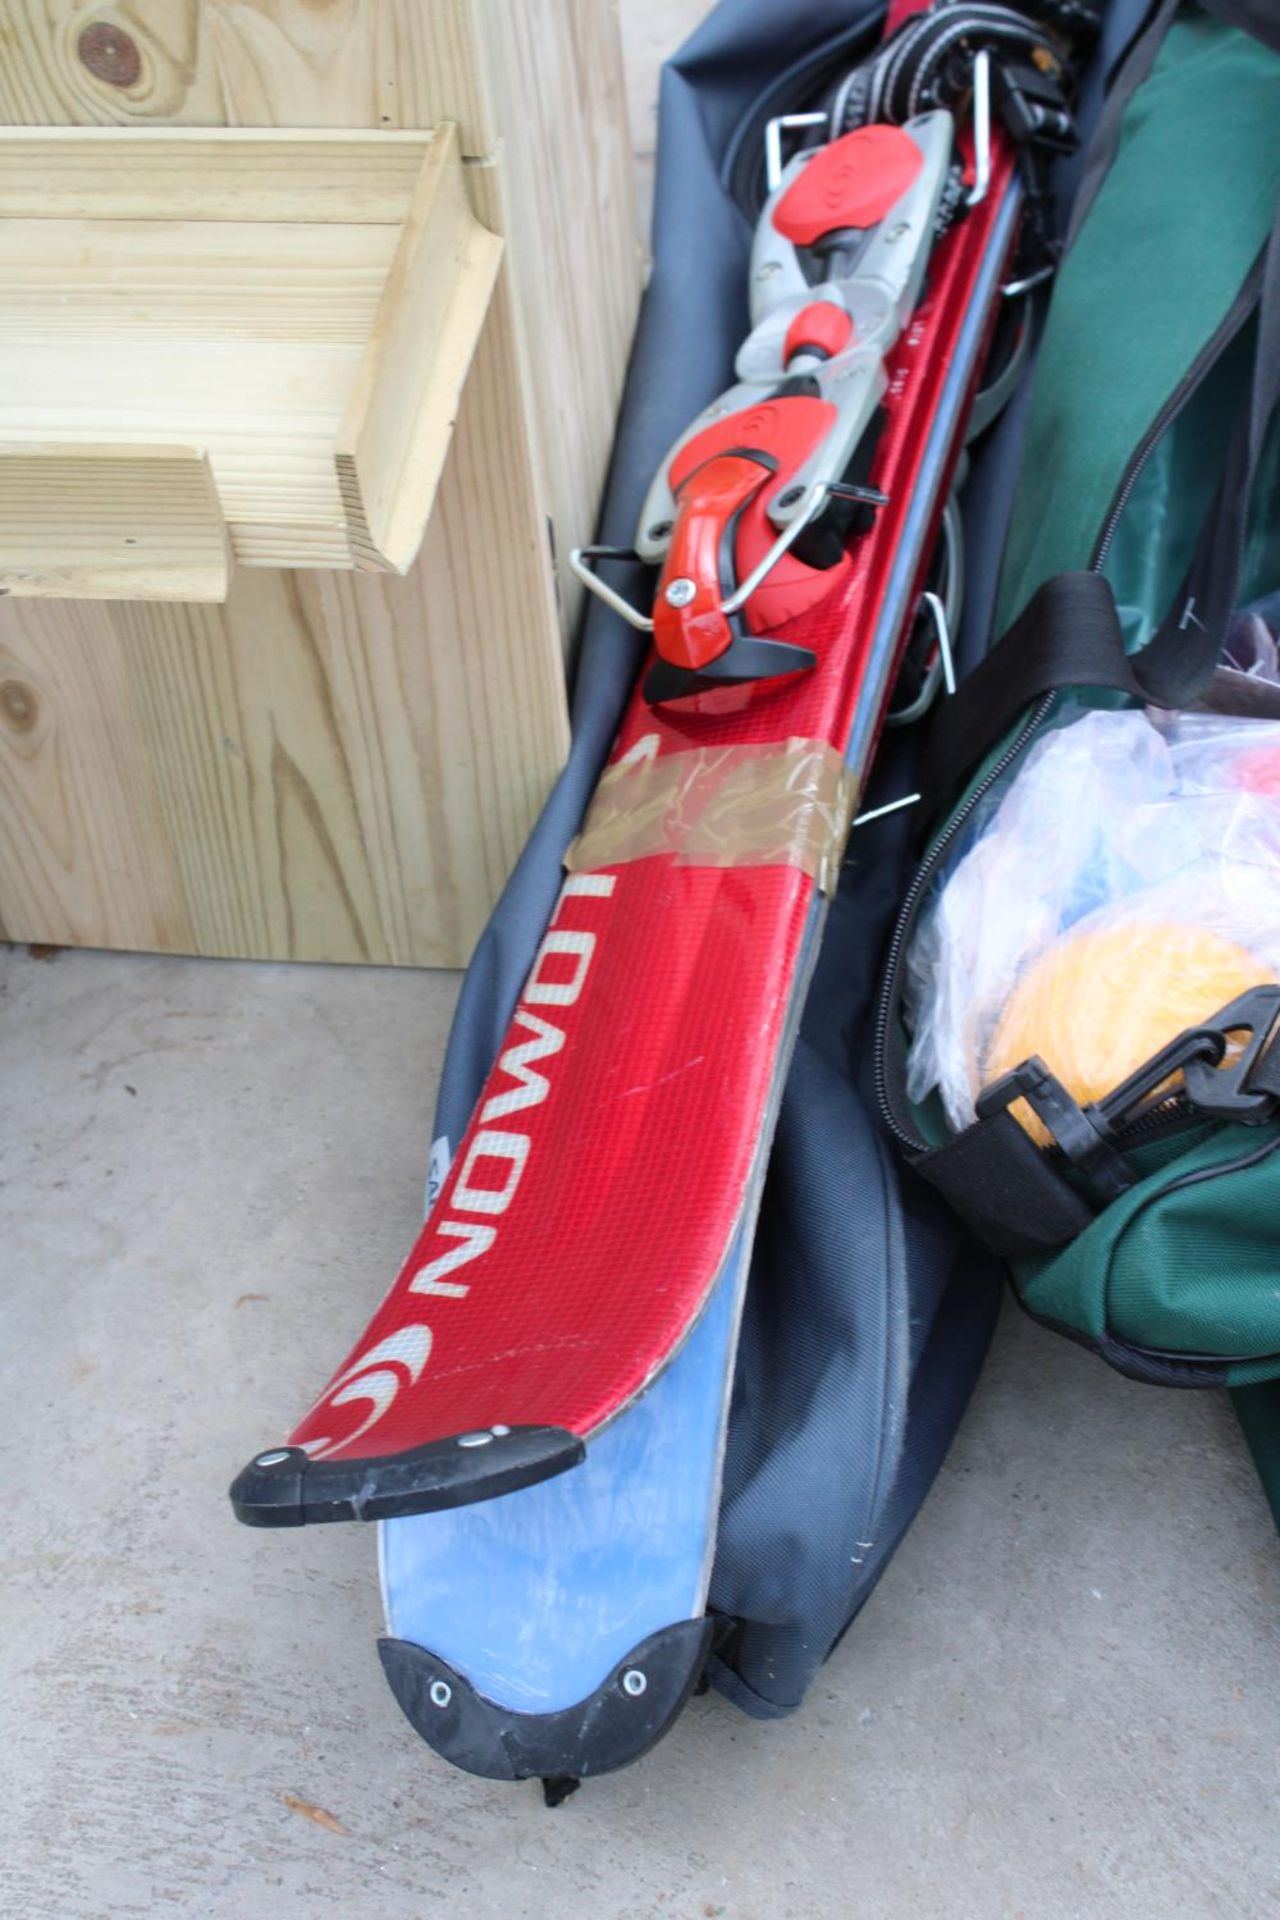 AN AS NEW AND CZSED LAWN GARDEN CROQUET SET AND A SET OF SKIS - Image 4 of 6